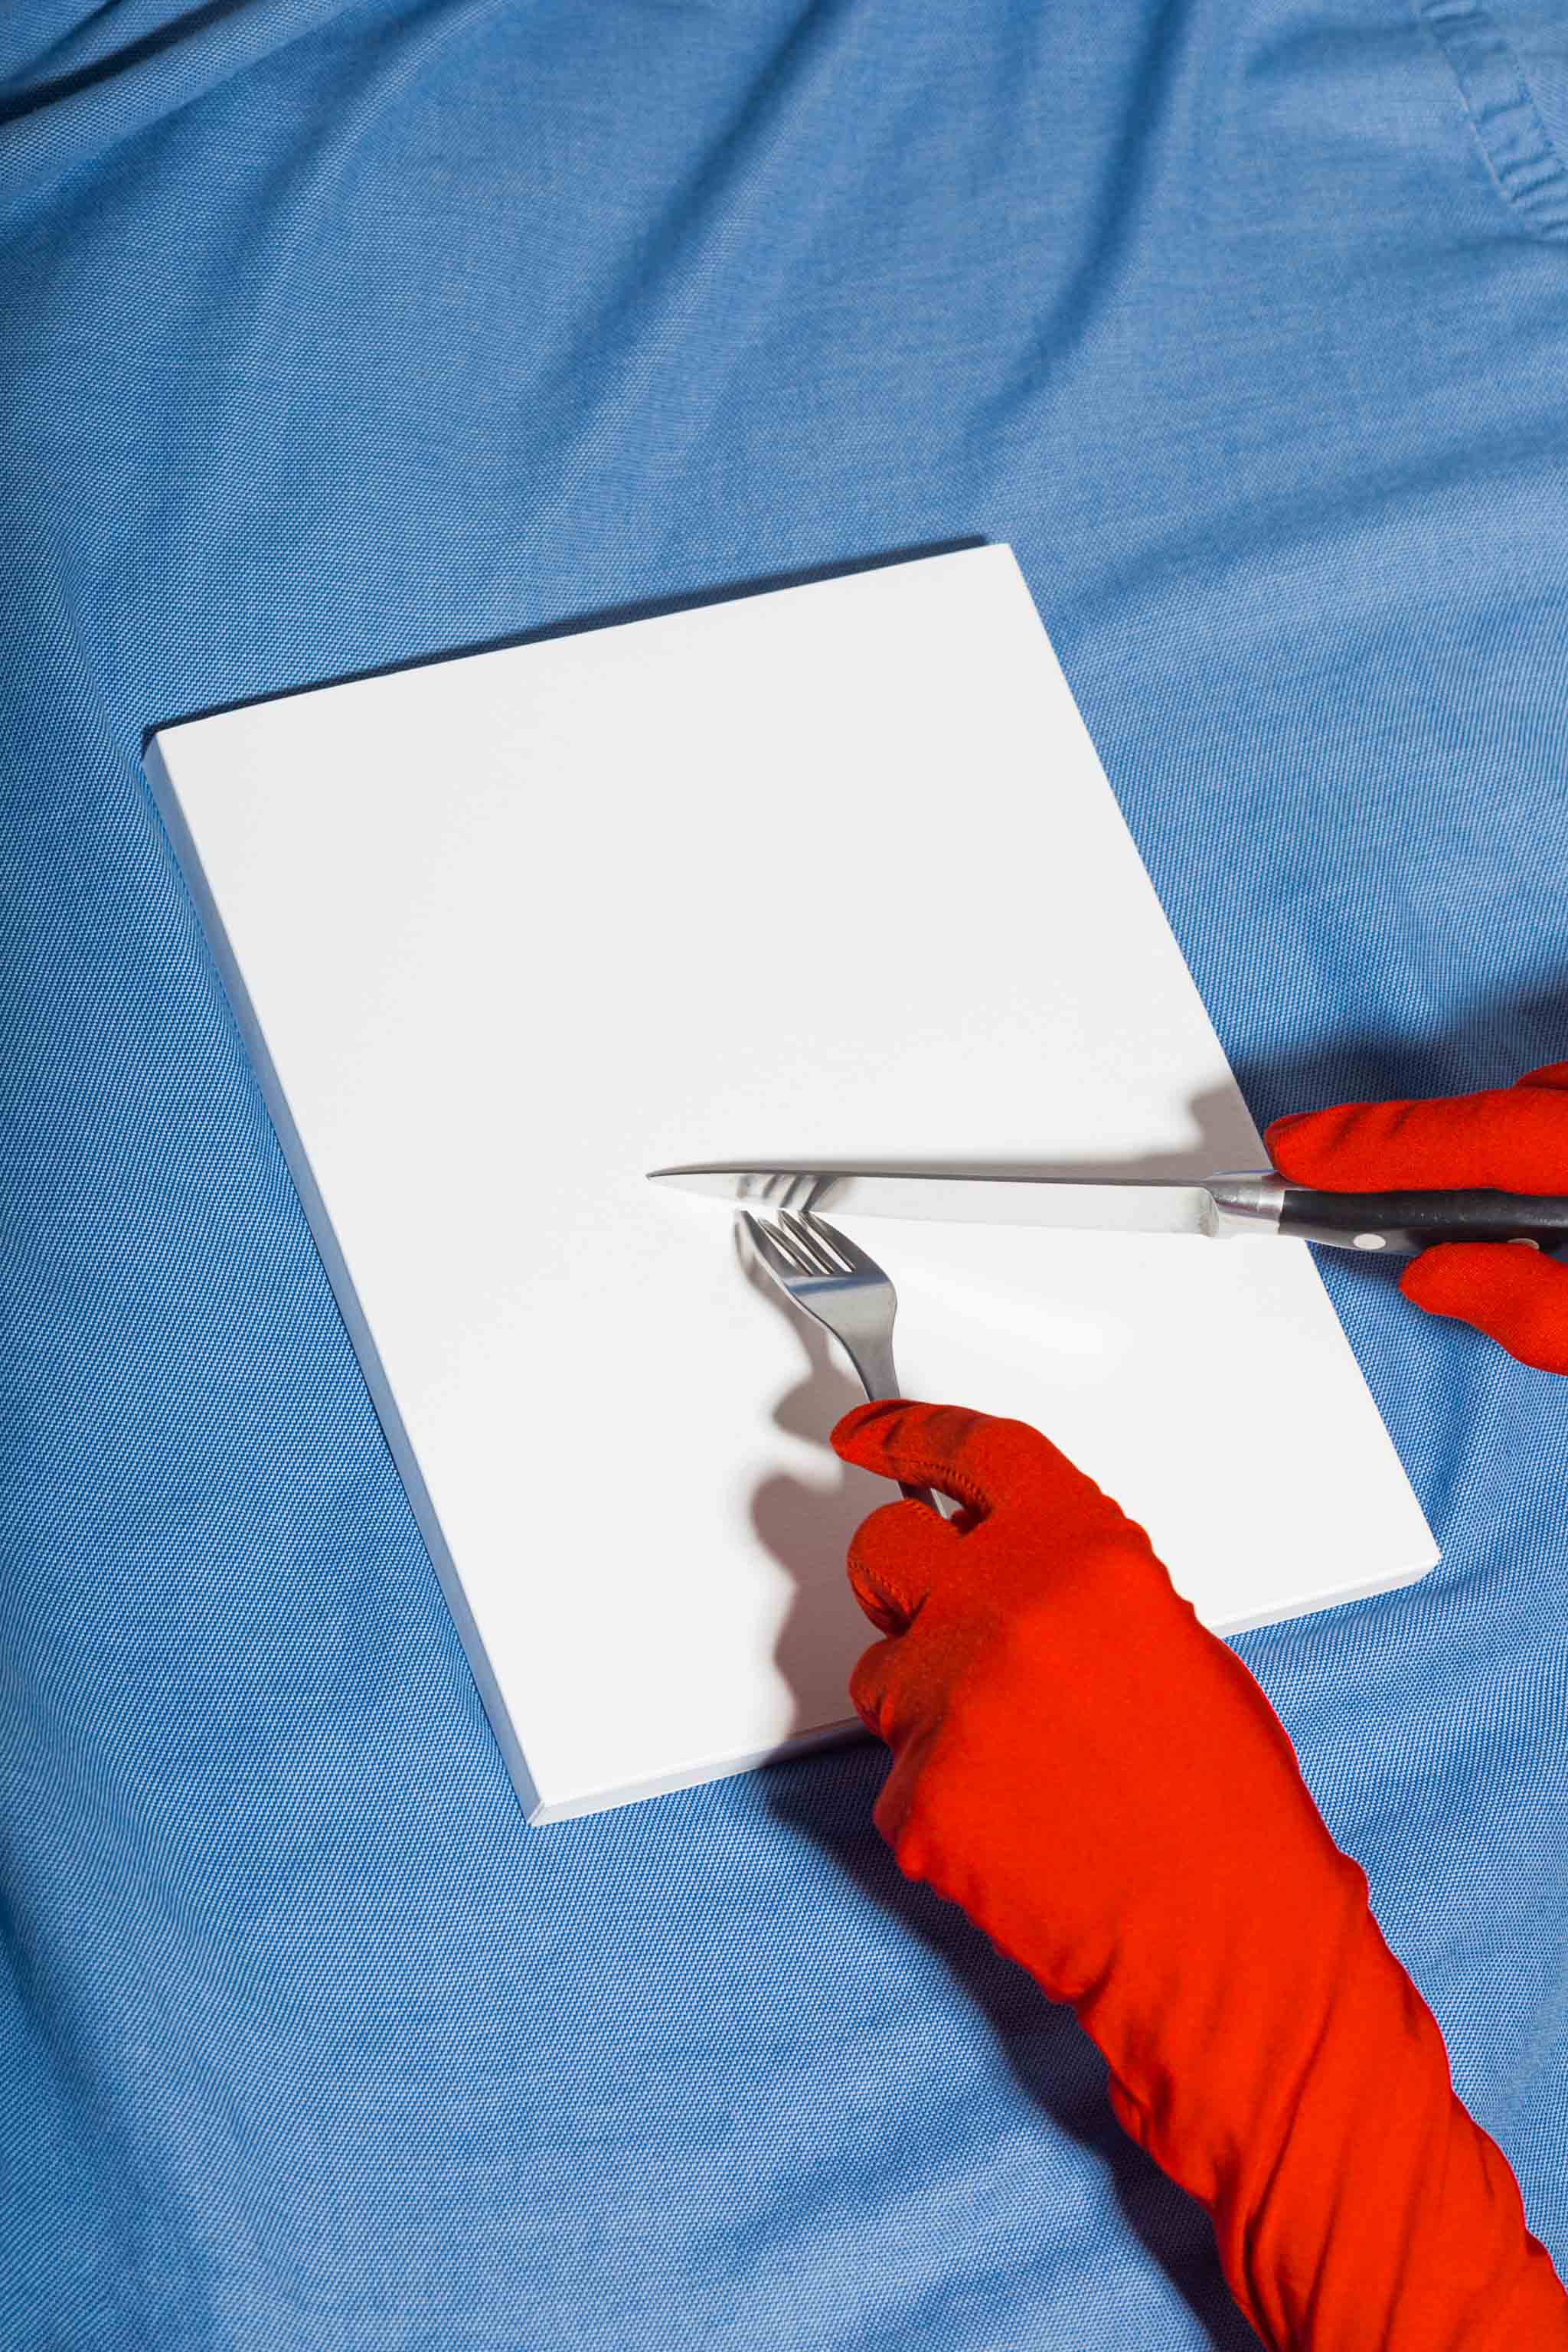 Two gloved hands holding utensils over a book cover mockup set against blue fabric, empty mockup.